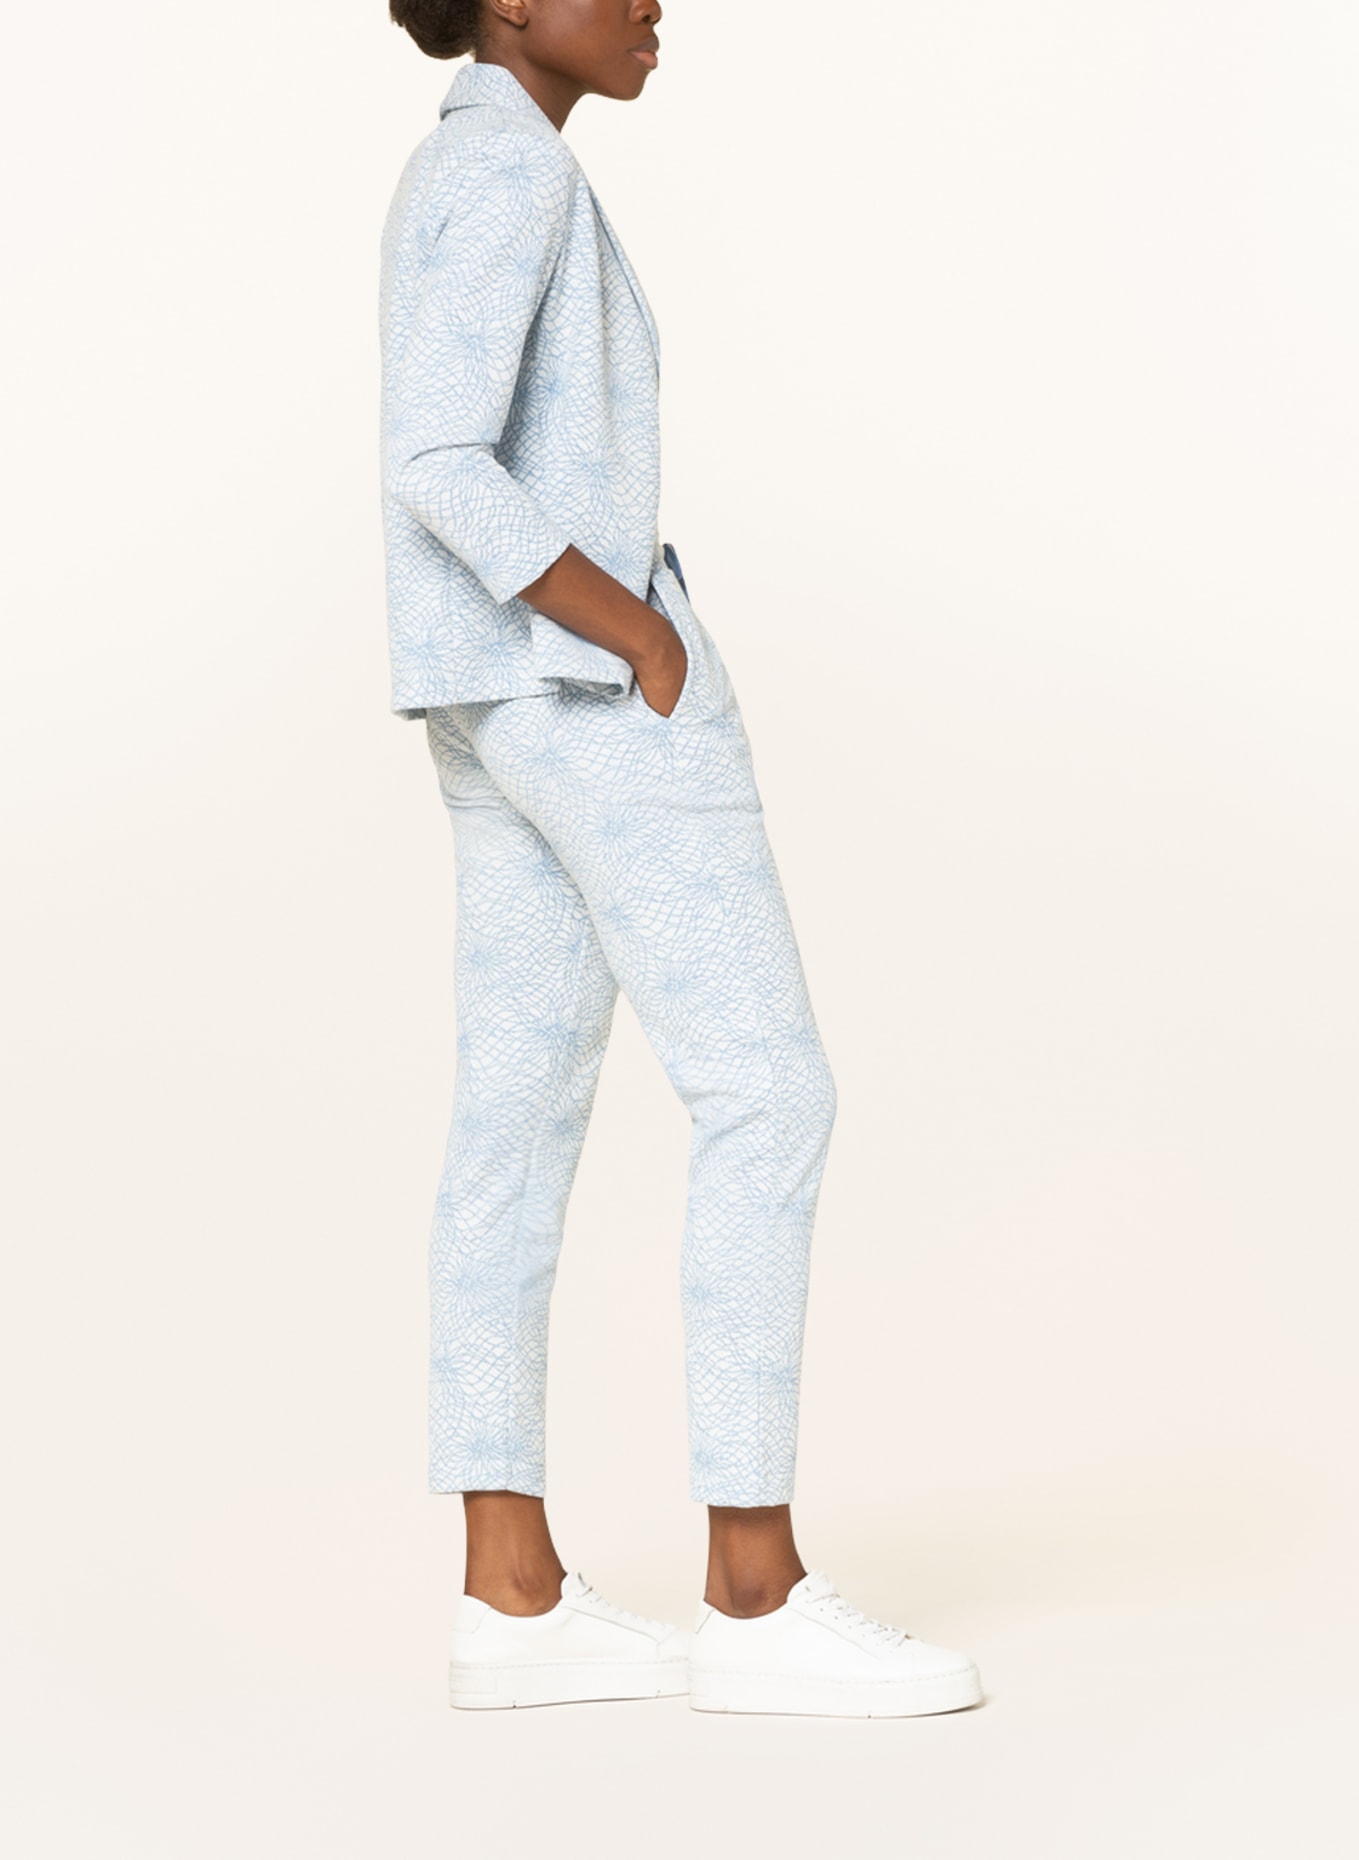 rich&royal Knit trousers in jogger style, Color: CREAM/ LIGHT BLUE/ SILVER (Image 4)